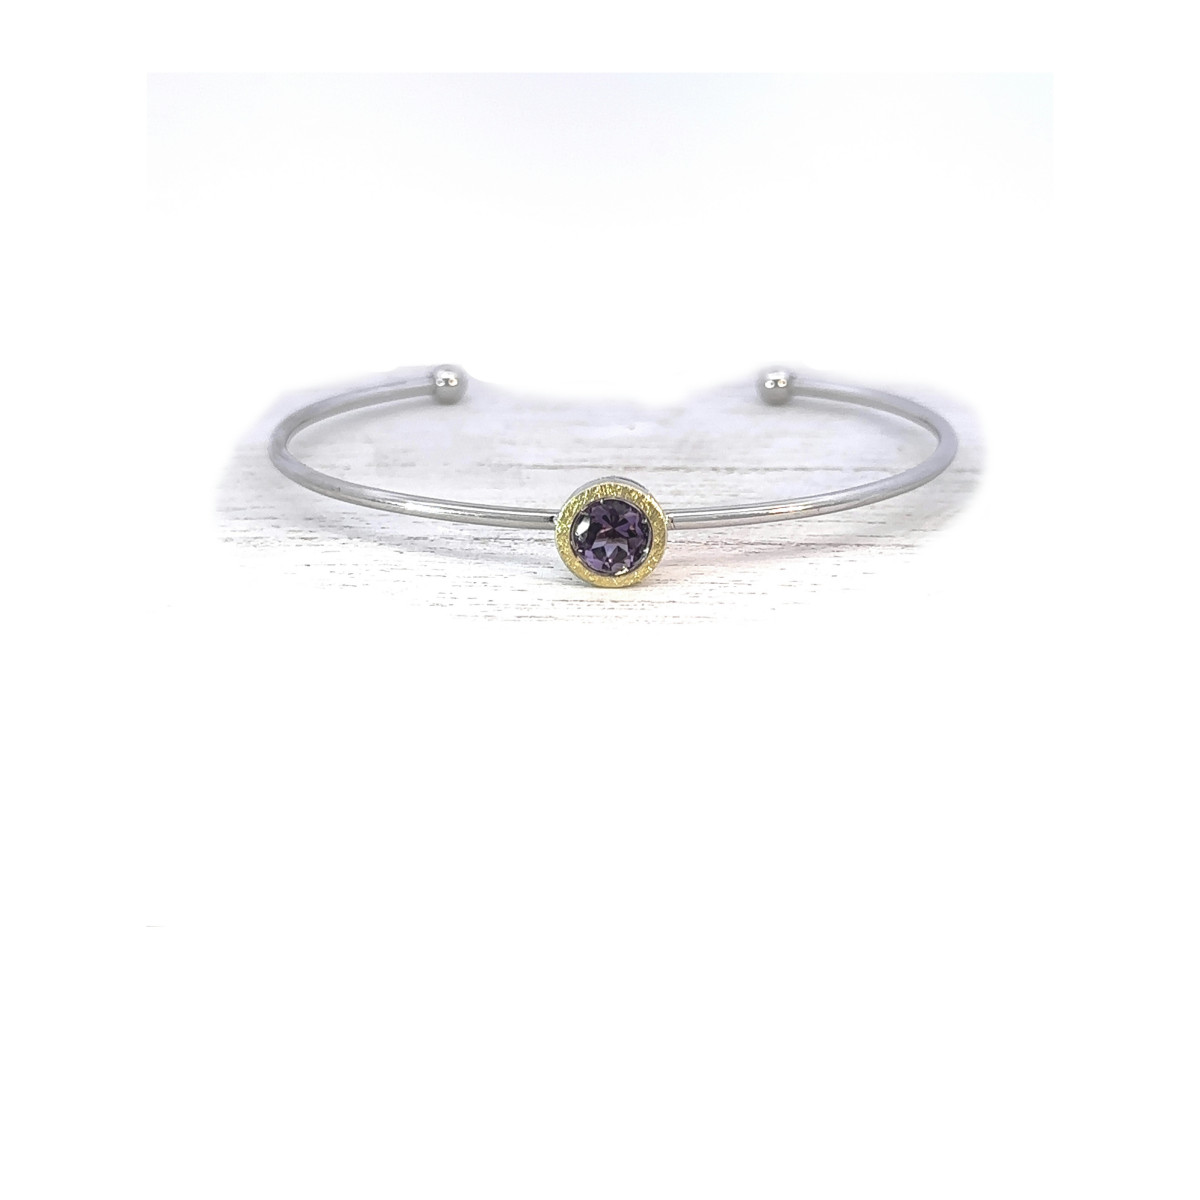 Silver, gold and amethyst bracelet